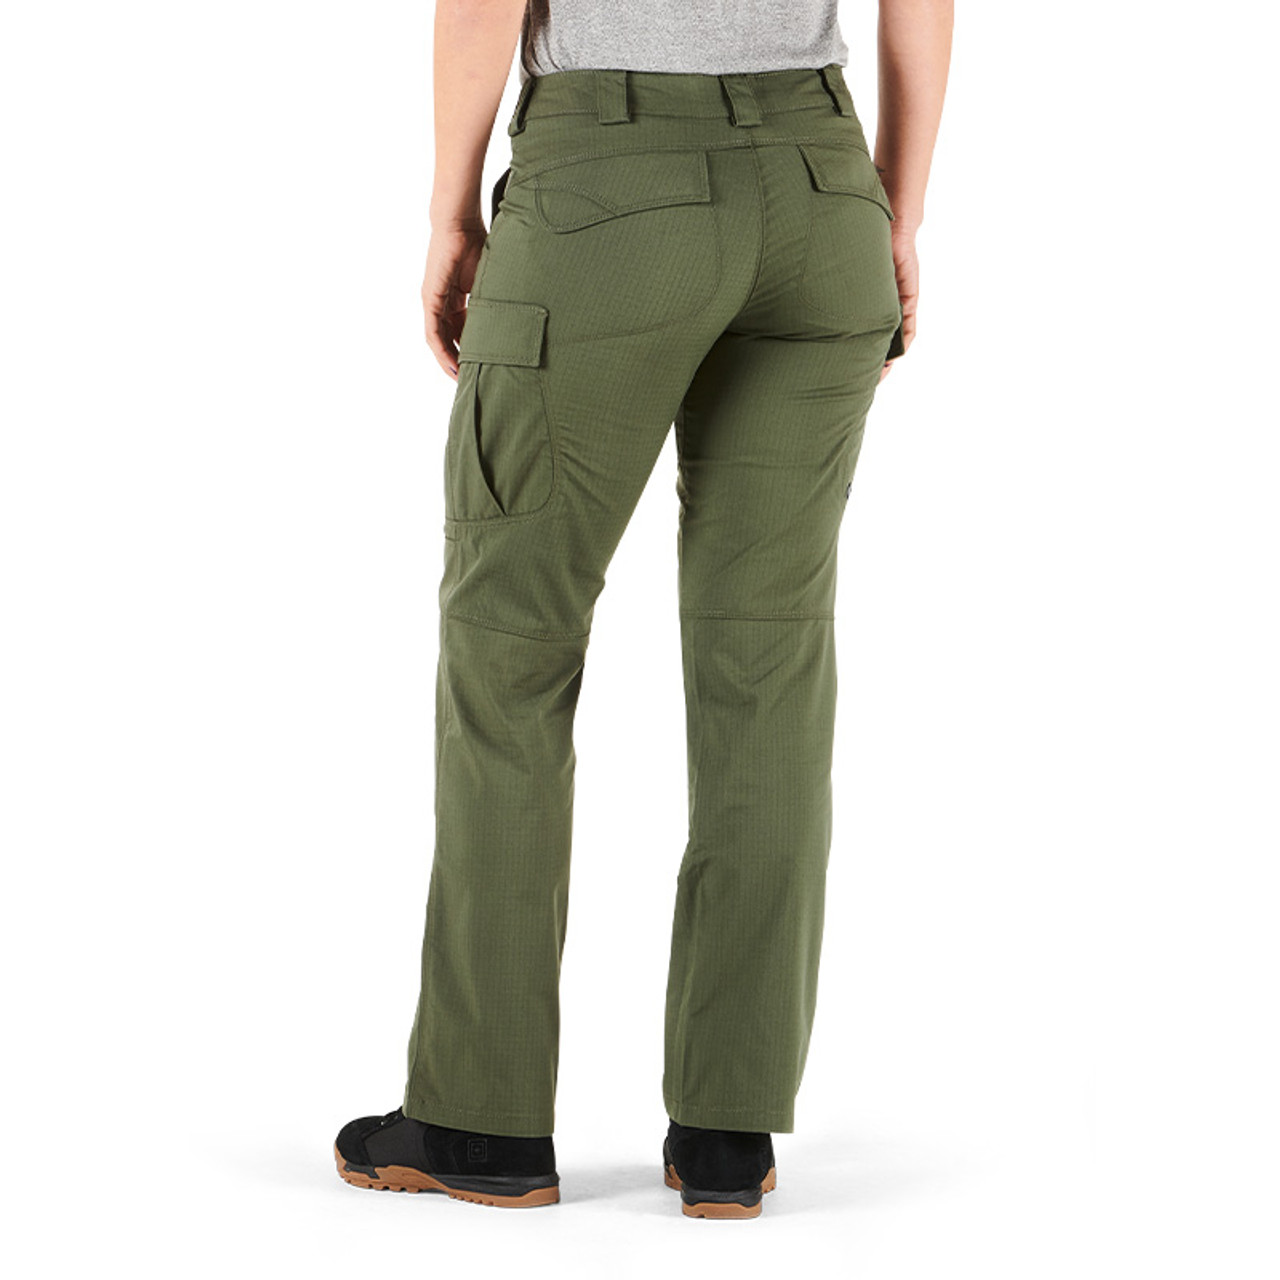 Women's Flex Woven Mid-rise Cargo Joggers - All In Motion™ Green